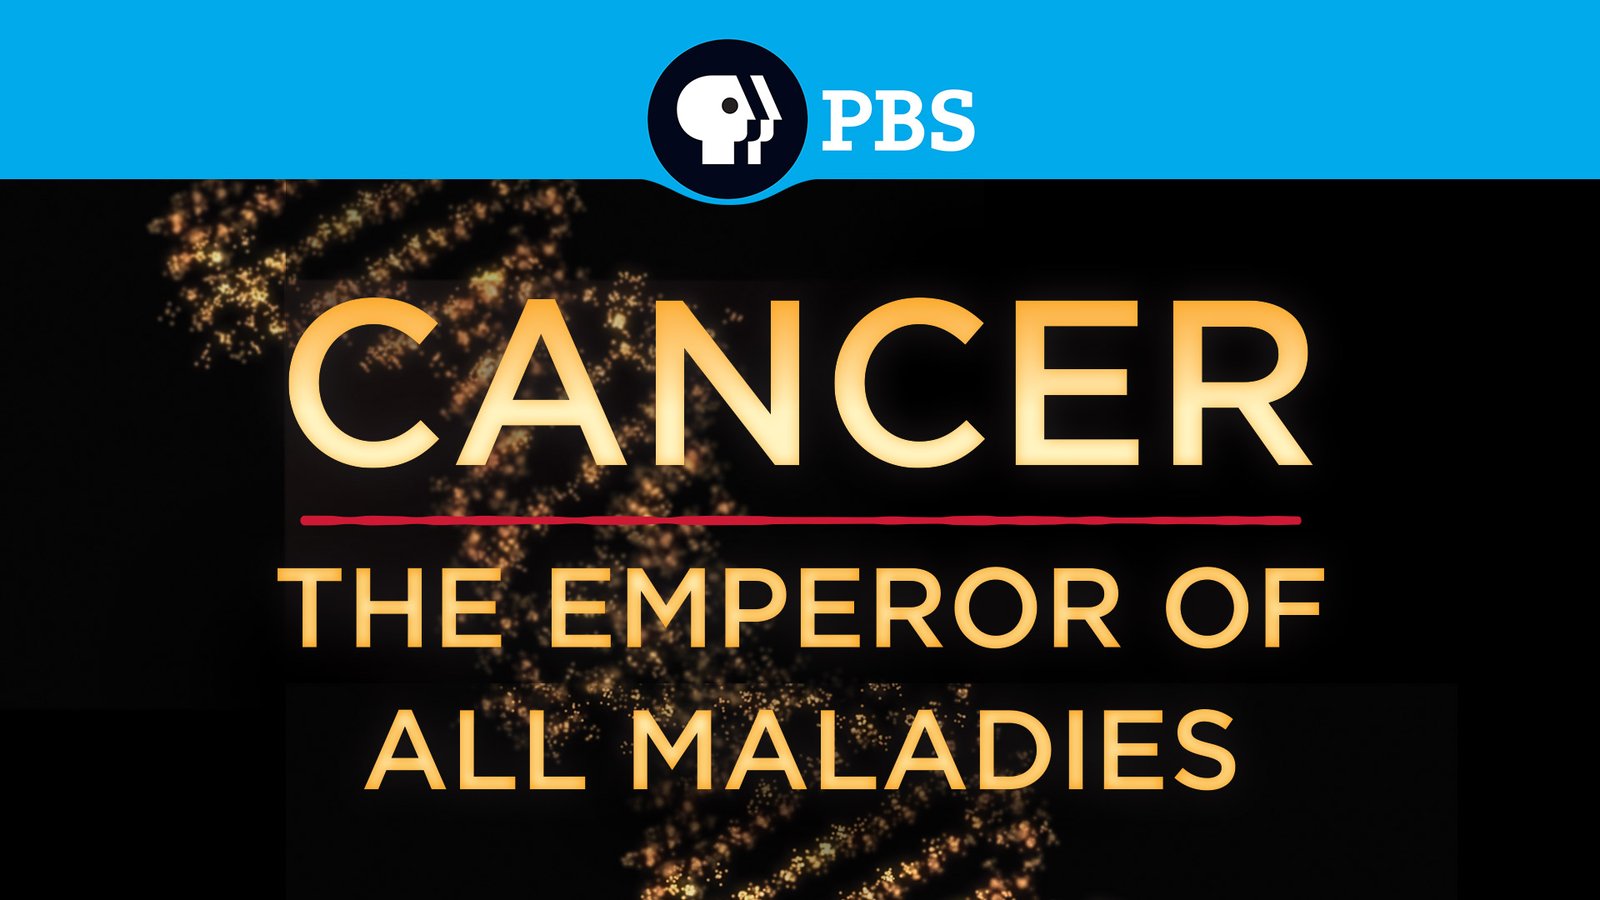 Cancer - The Emperor of All Maladies